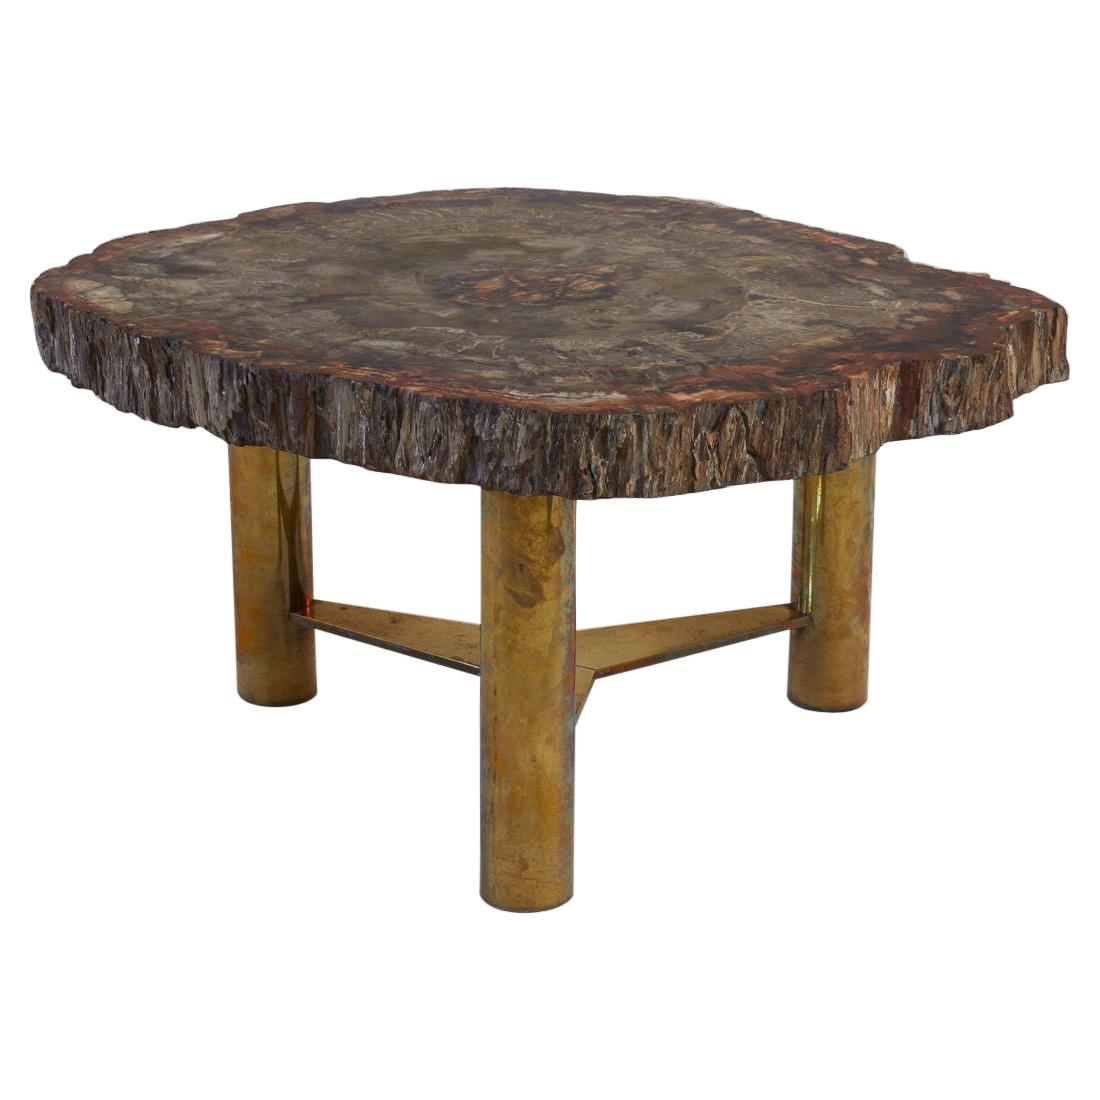 1960s French Petrified Wood Plateaux with Bronze Base Cocktail Table For Sale